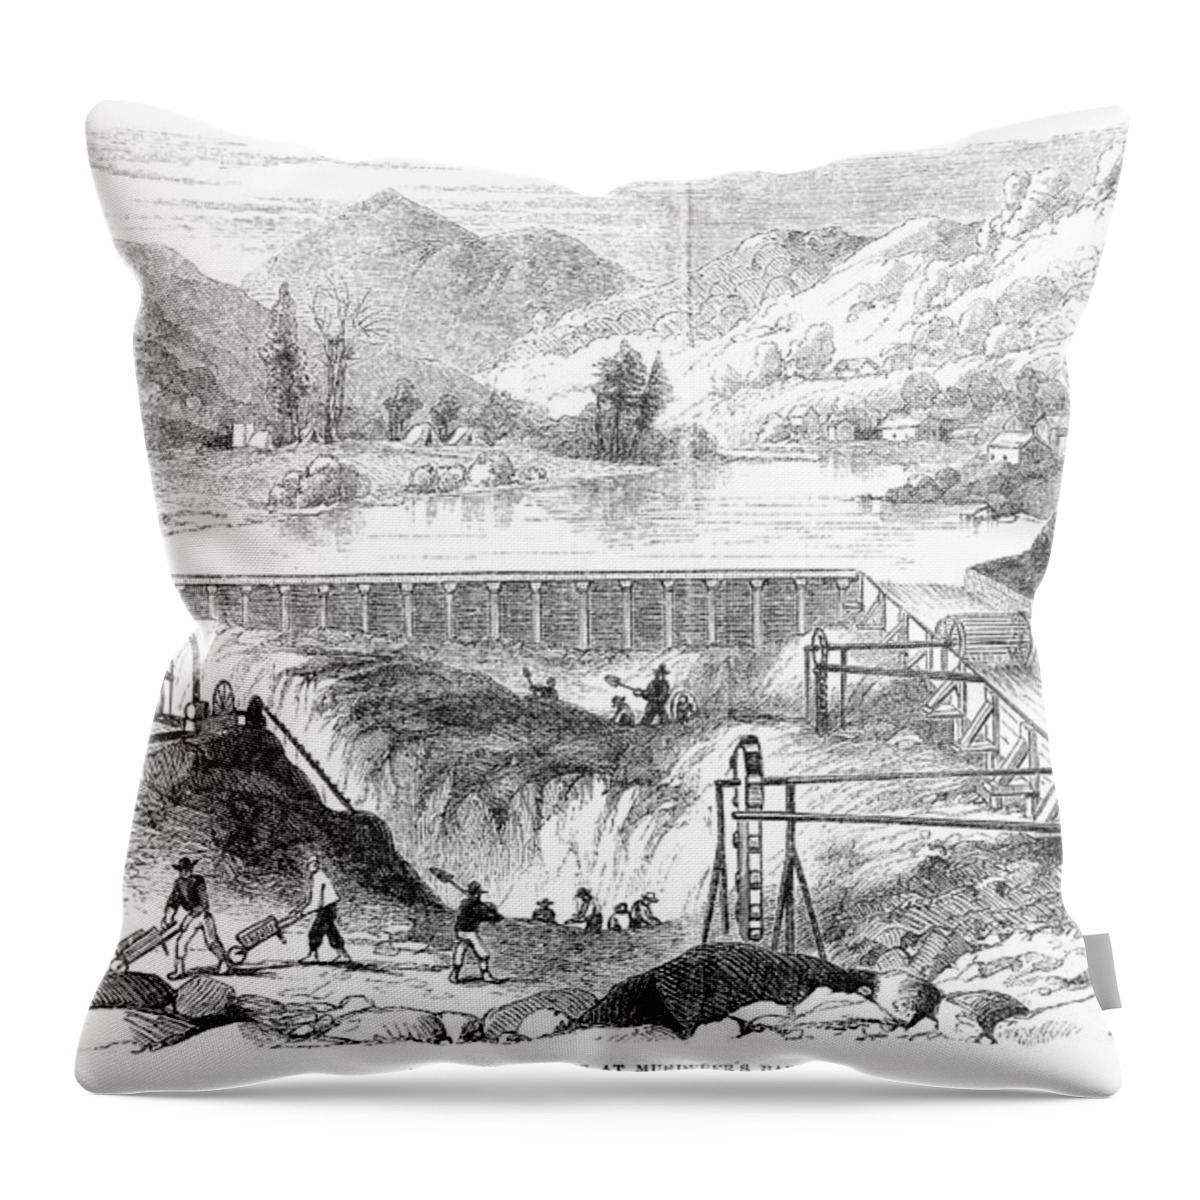 1860 Throw Pillow featuring the photograph California Gold Rush by Granger